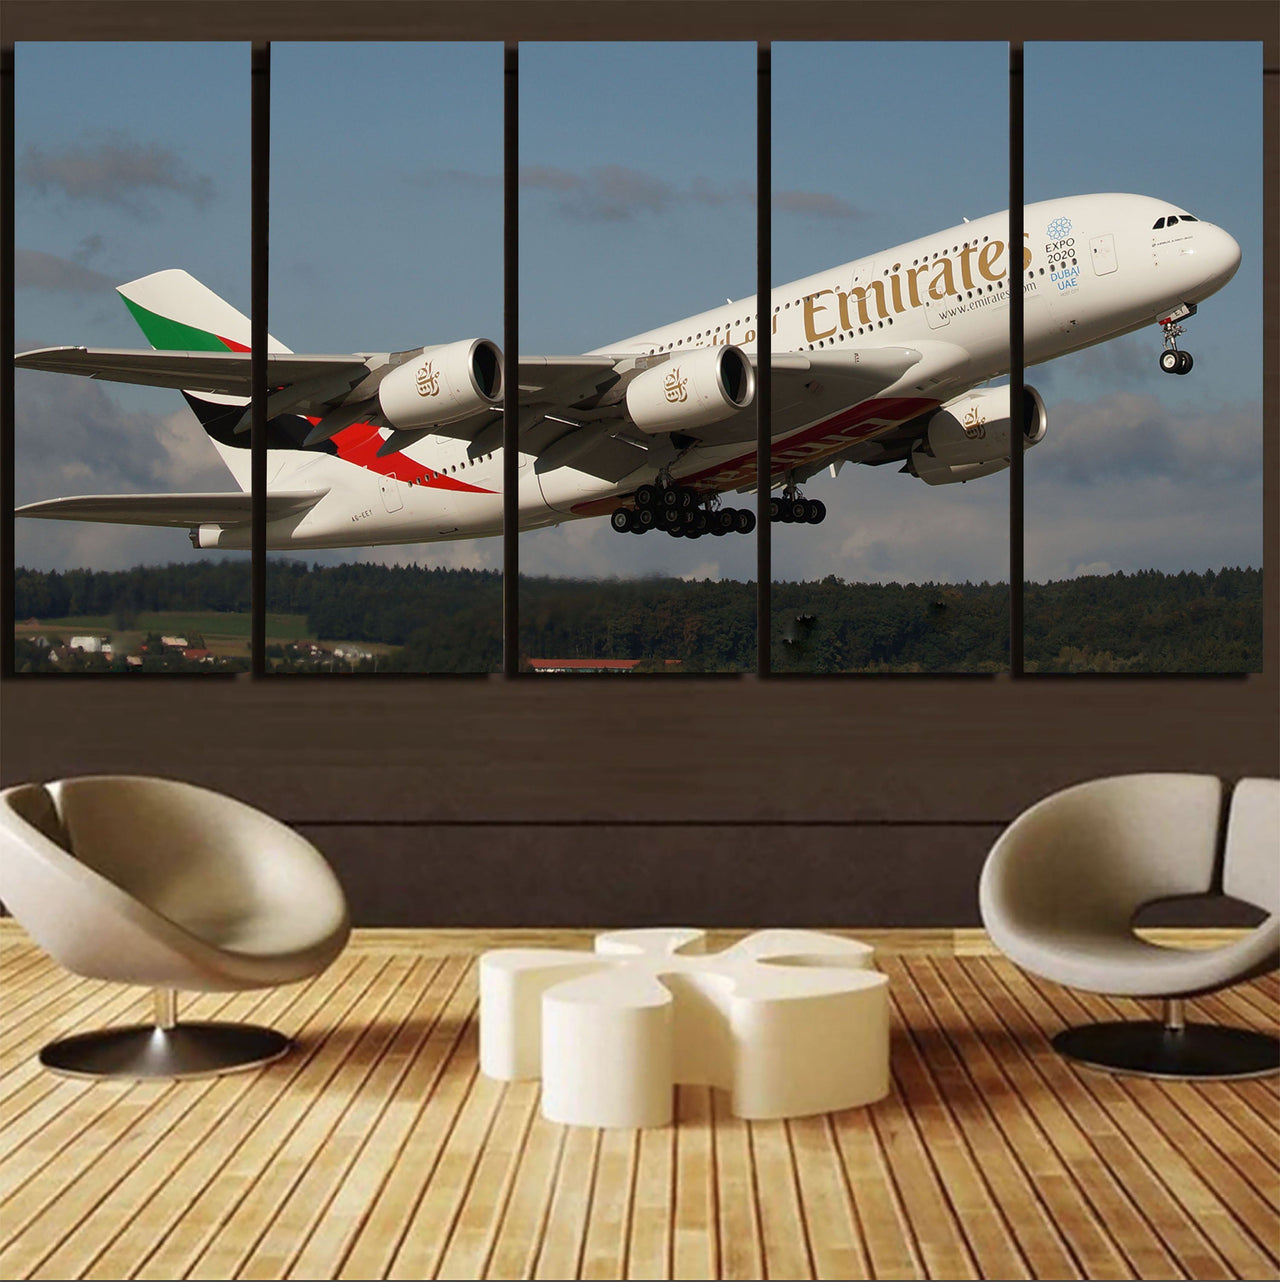 Departing Emirates A380 Printed Canvas Prints (5 Pieces) Aviation Shop 